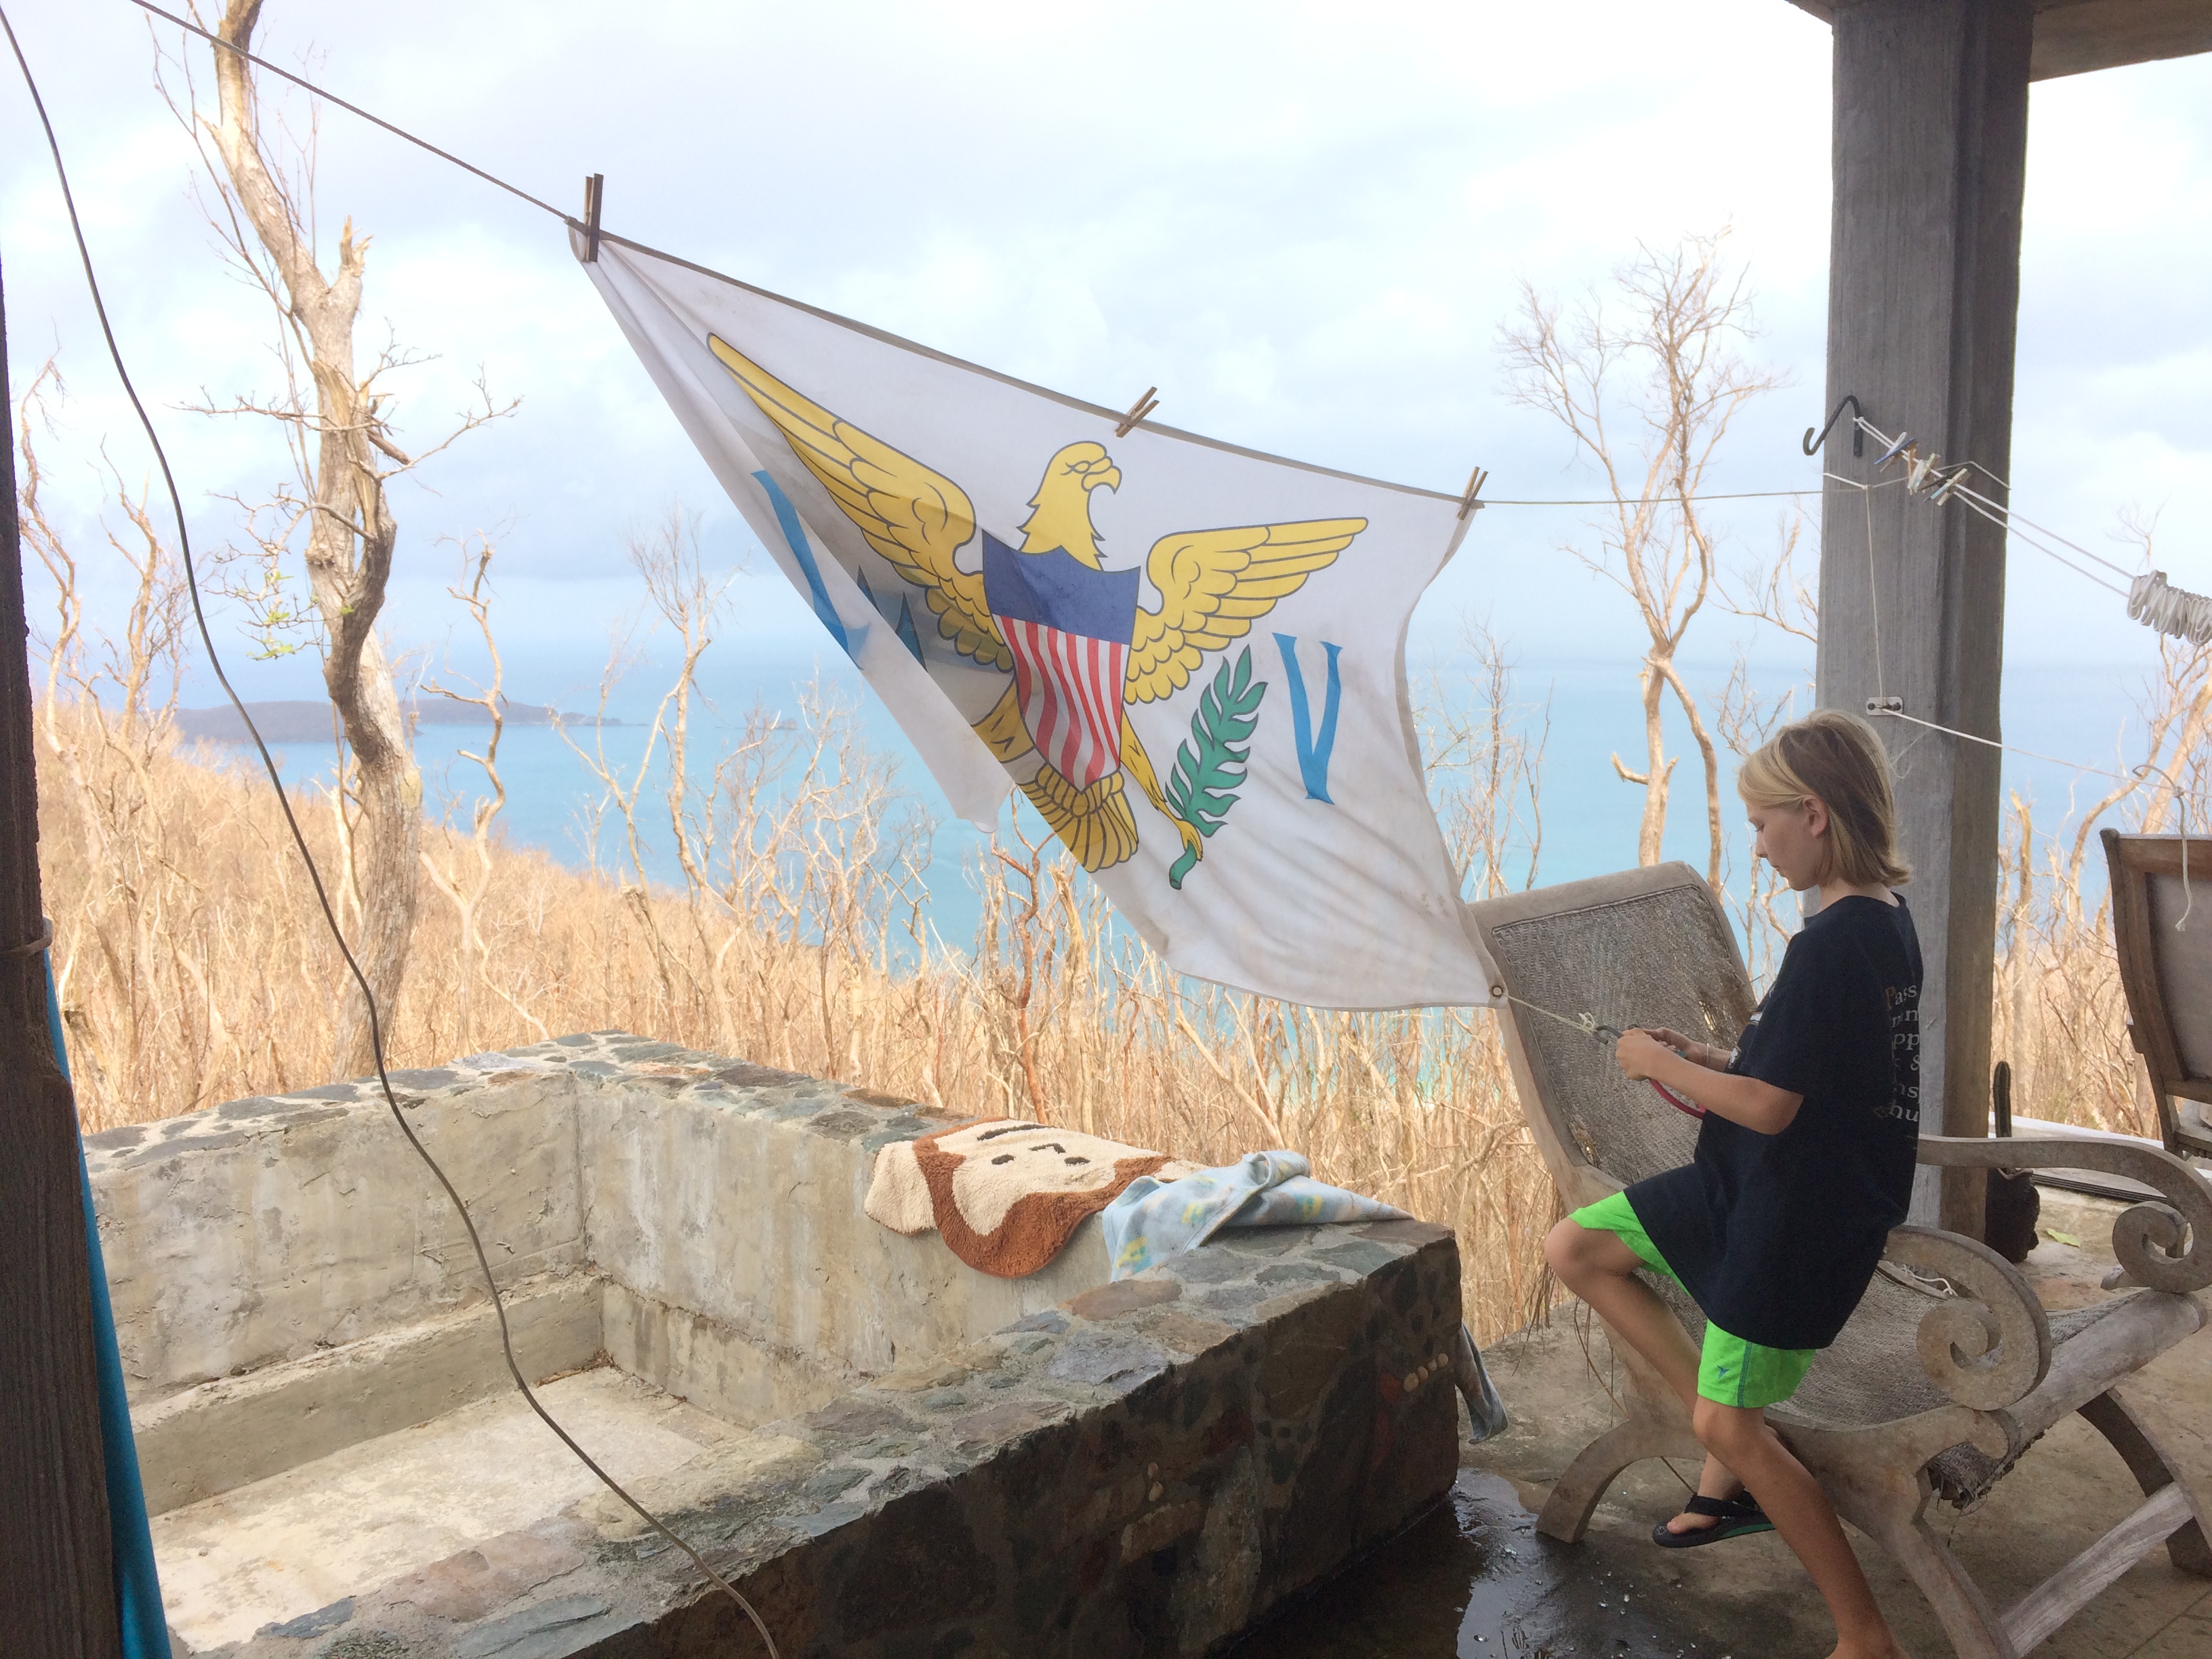 Our son stringing up the flag that used to hang in their room and was found in our neighbor’s yard after the storm. Nothing can take away our love for this place!